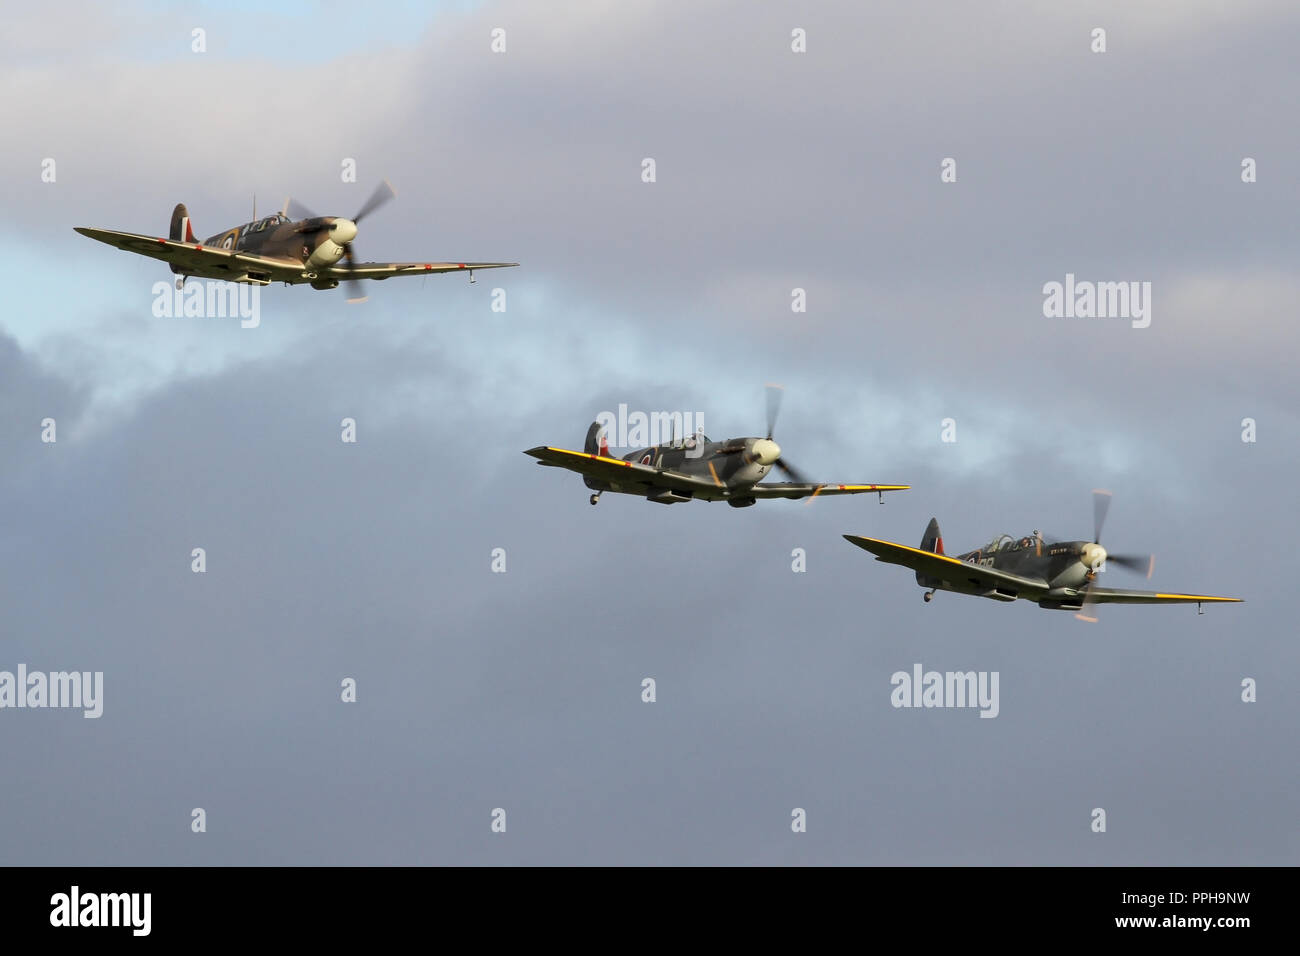 Formation flypast by three Supermarine Spitfires to conclude the September air show. Stock Photo